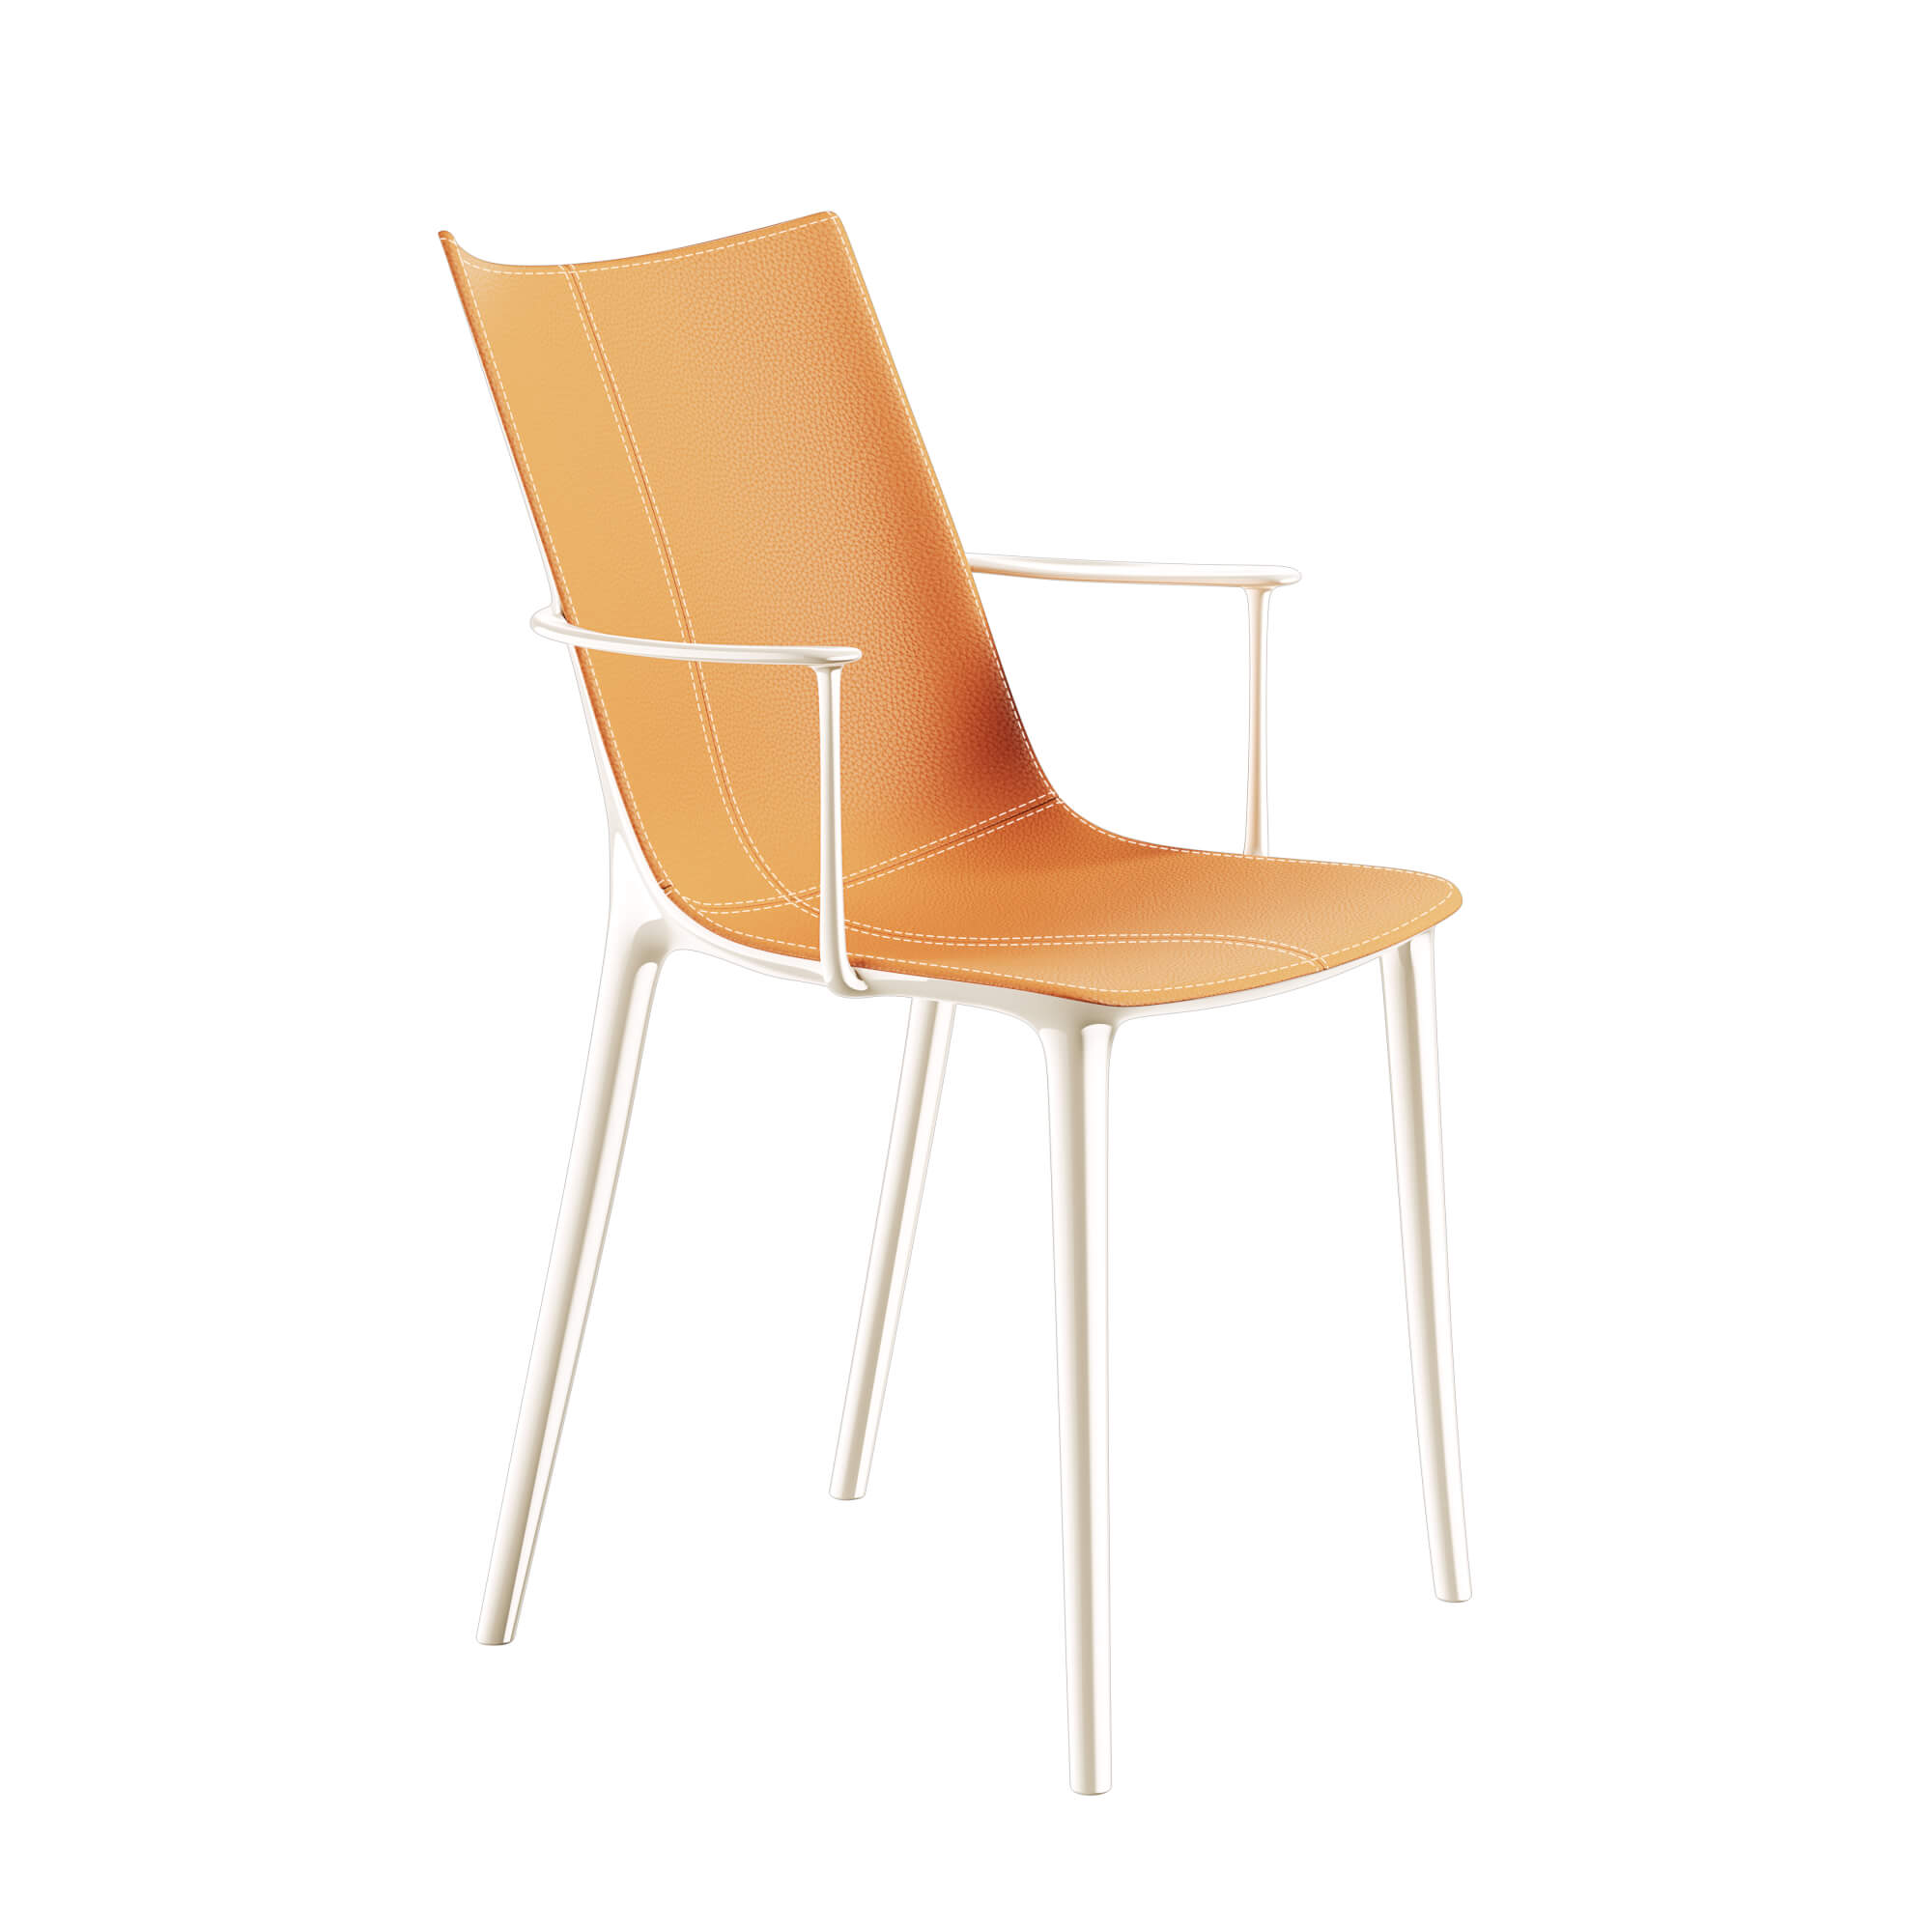 H.H.H. (Kartell) - Chairs